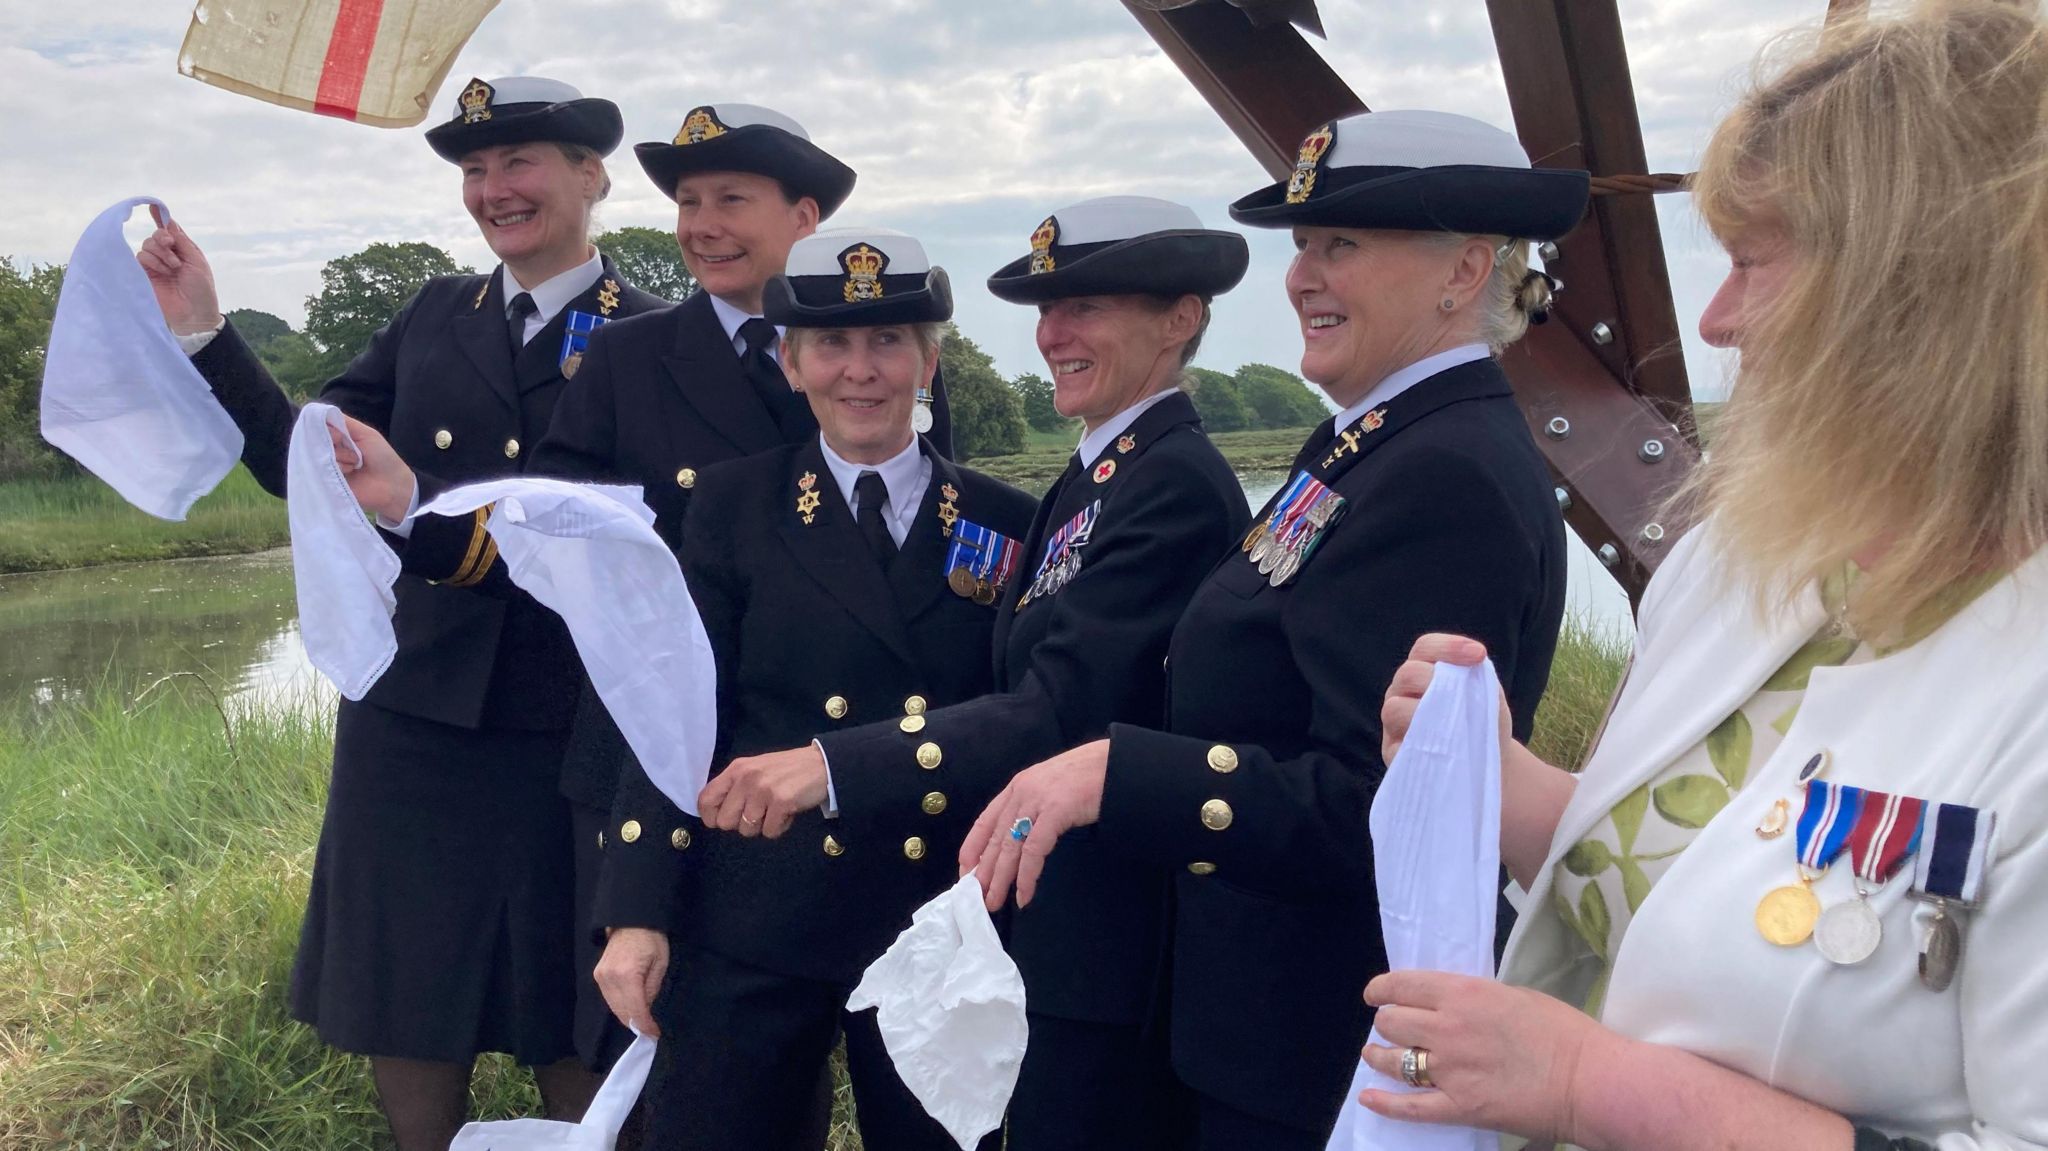 A group of six white women - five of which are wearing Royal Navy uniform, smile looking away from the camera and hold white handkerchiefs